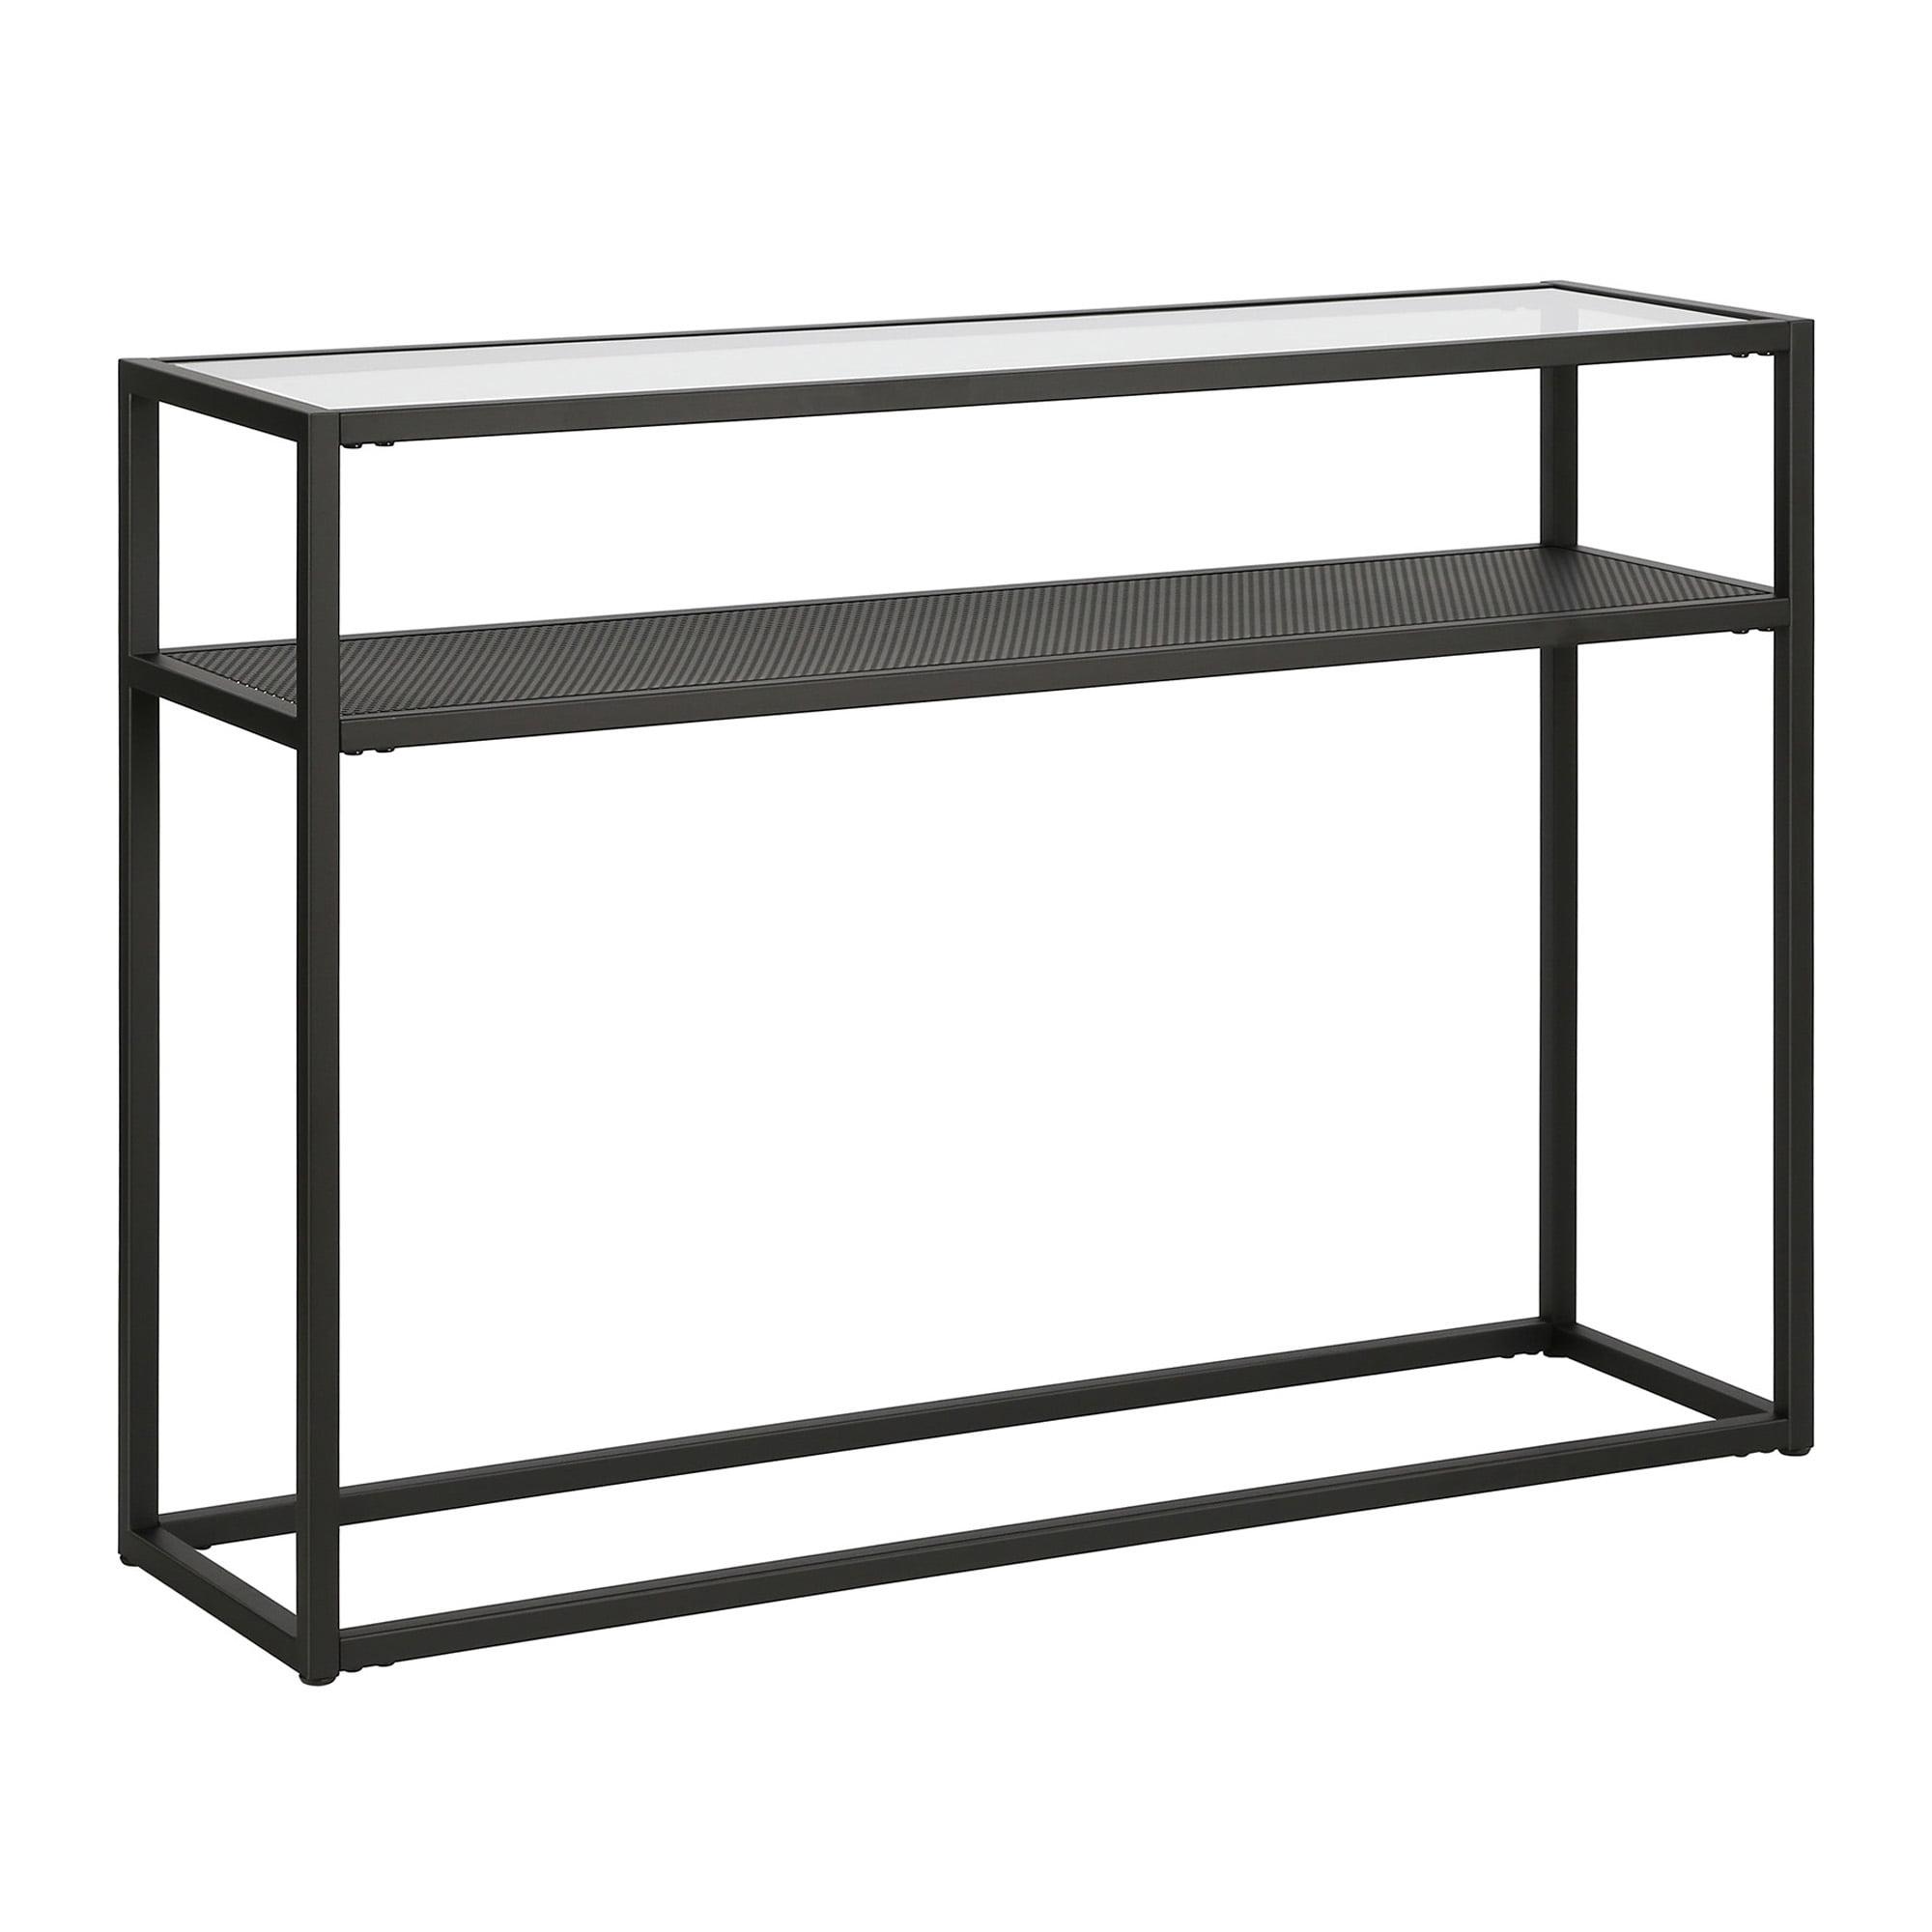 Nellie 42" Blackened Bronze Console Table with Metal Mesh Storage Shelf